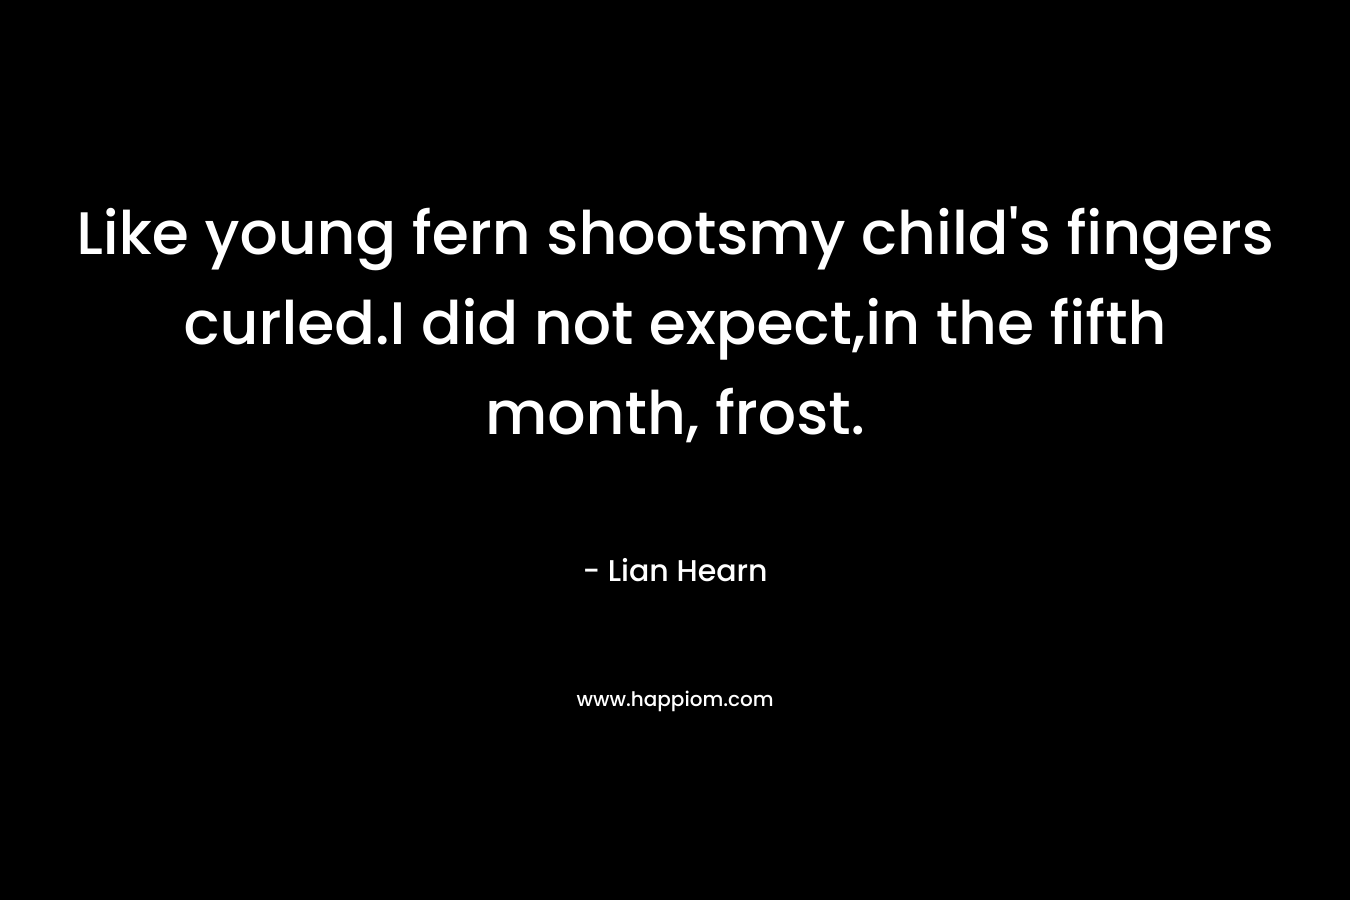 Like young fern shootsmy child’s fingers curled.I did not expect,in the fifth month, frost. – Lian Hearn